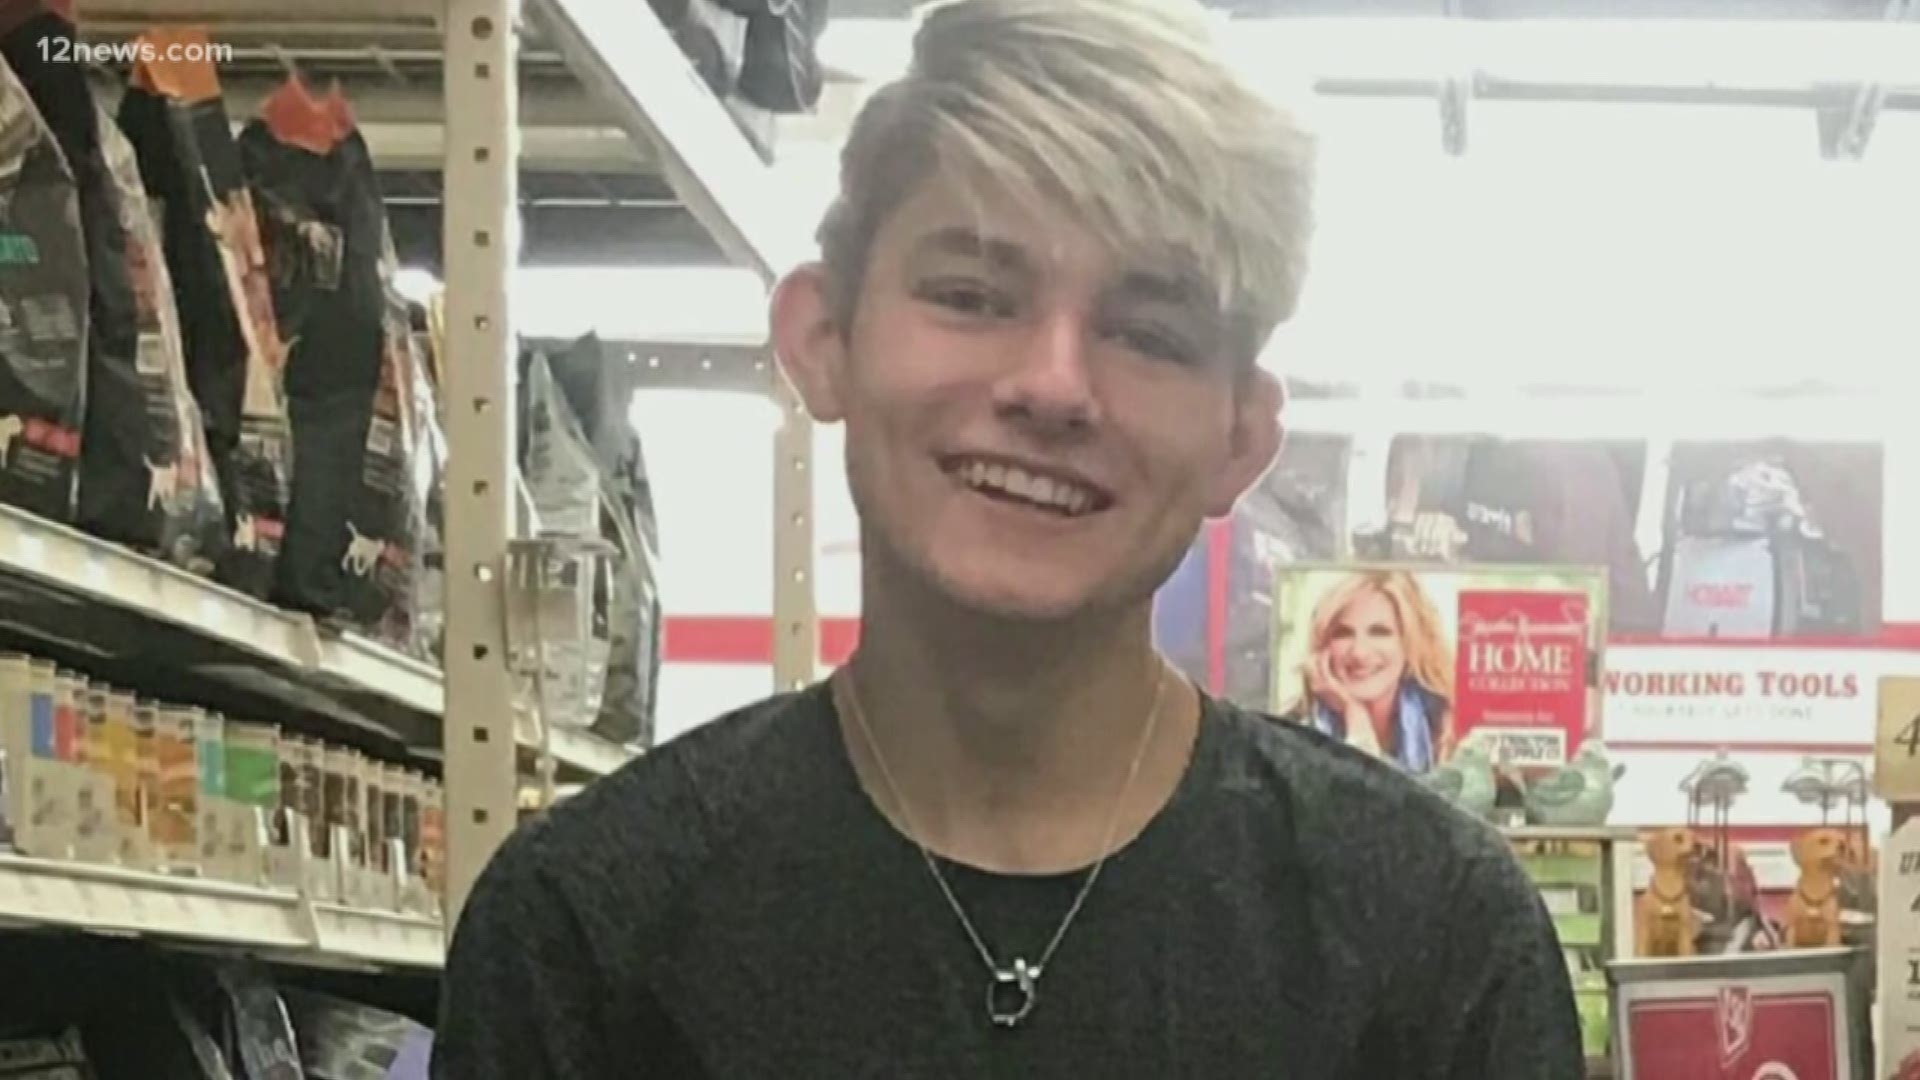 Weston Ayers was on his skateboard going home from school when he was struck by a driver's side-view mirror. Weston's girlfriend speaks to 12 News about what a kindhearted boy he was.